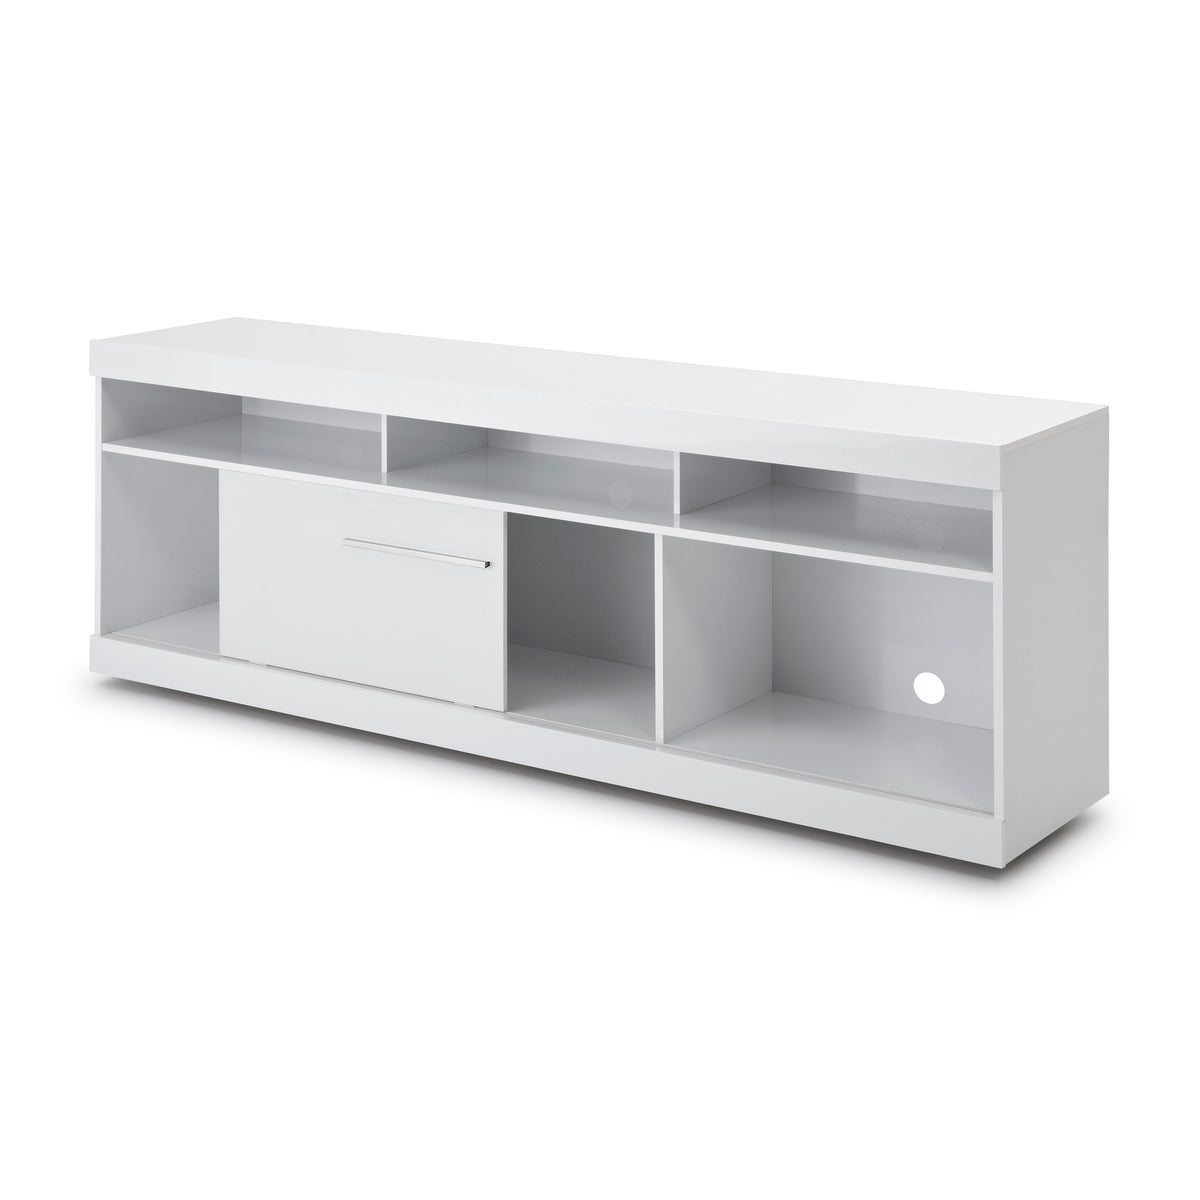 Hud 71 Inch Modern TV Console Media Entertainment Center, 5 Open Compartments, 1 Sliding Door, White - UPT-242476